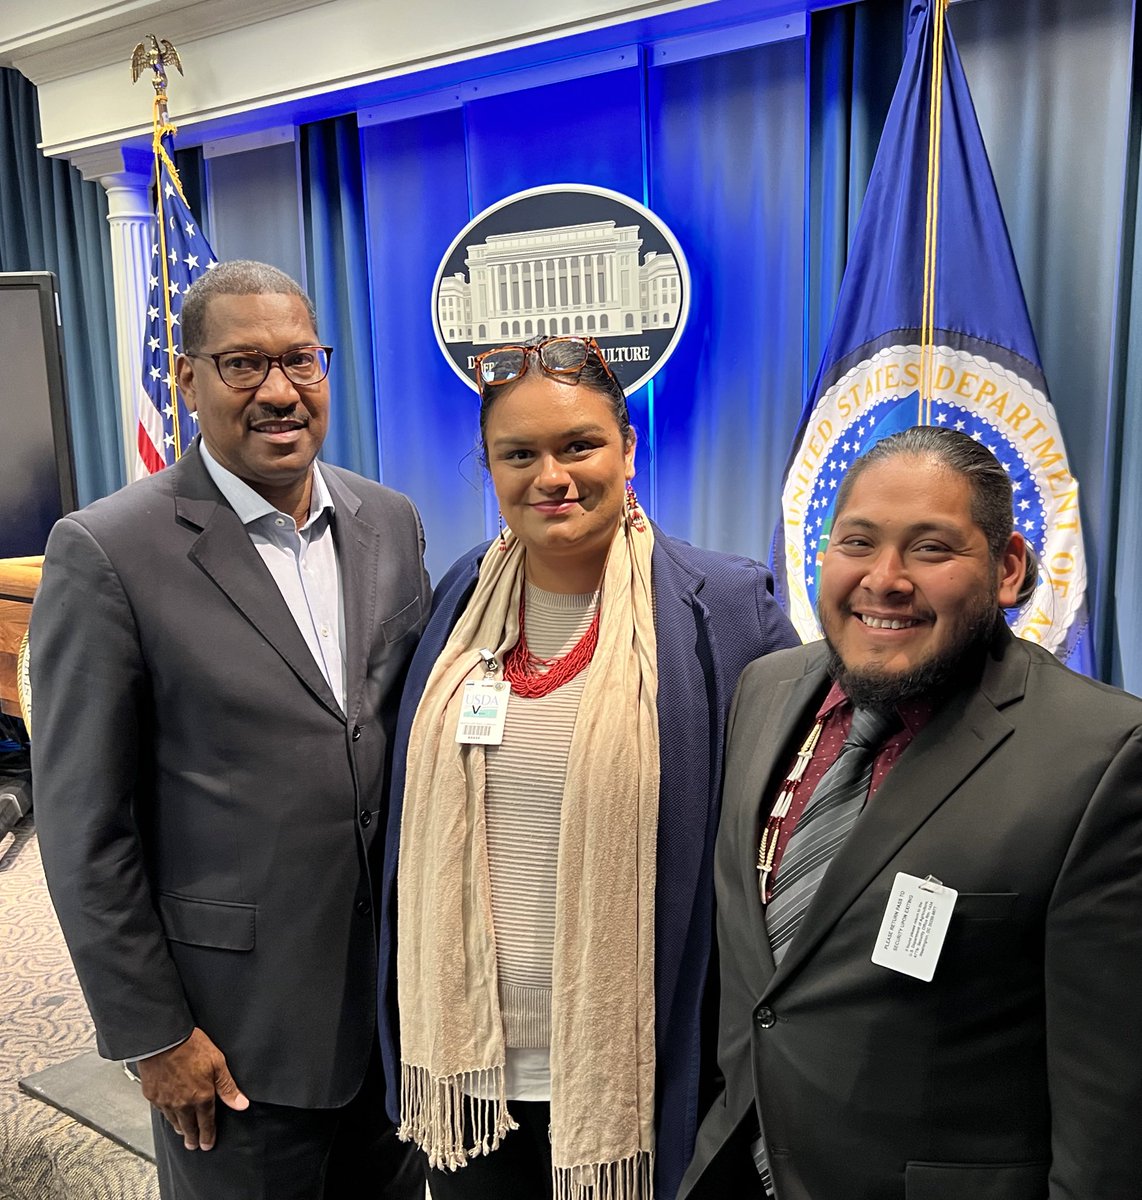 Under Secretary’s Dr. Homer Wilkes & Robert Bonnie of @USDA acknowledge the historic inequities towards BIPOC & marginalized communities.They are calling on us ALL to participate in solution based processes.
📸 Dr. Wilkes, Jazzari T. & André S.
@LatinoOutdoors @CalWild @AtB4All